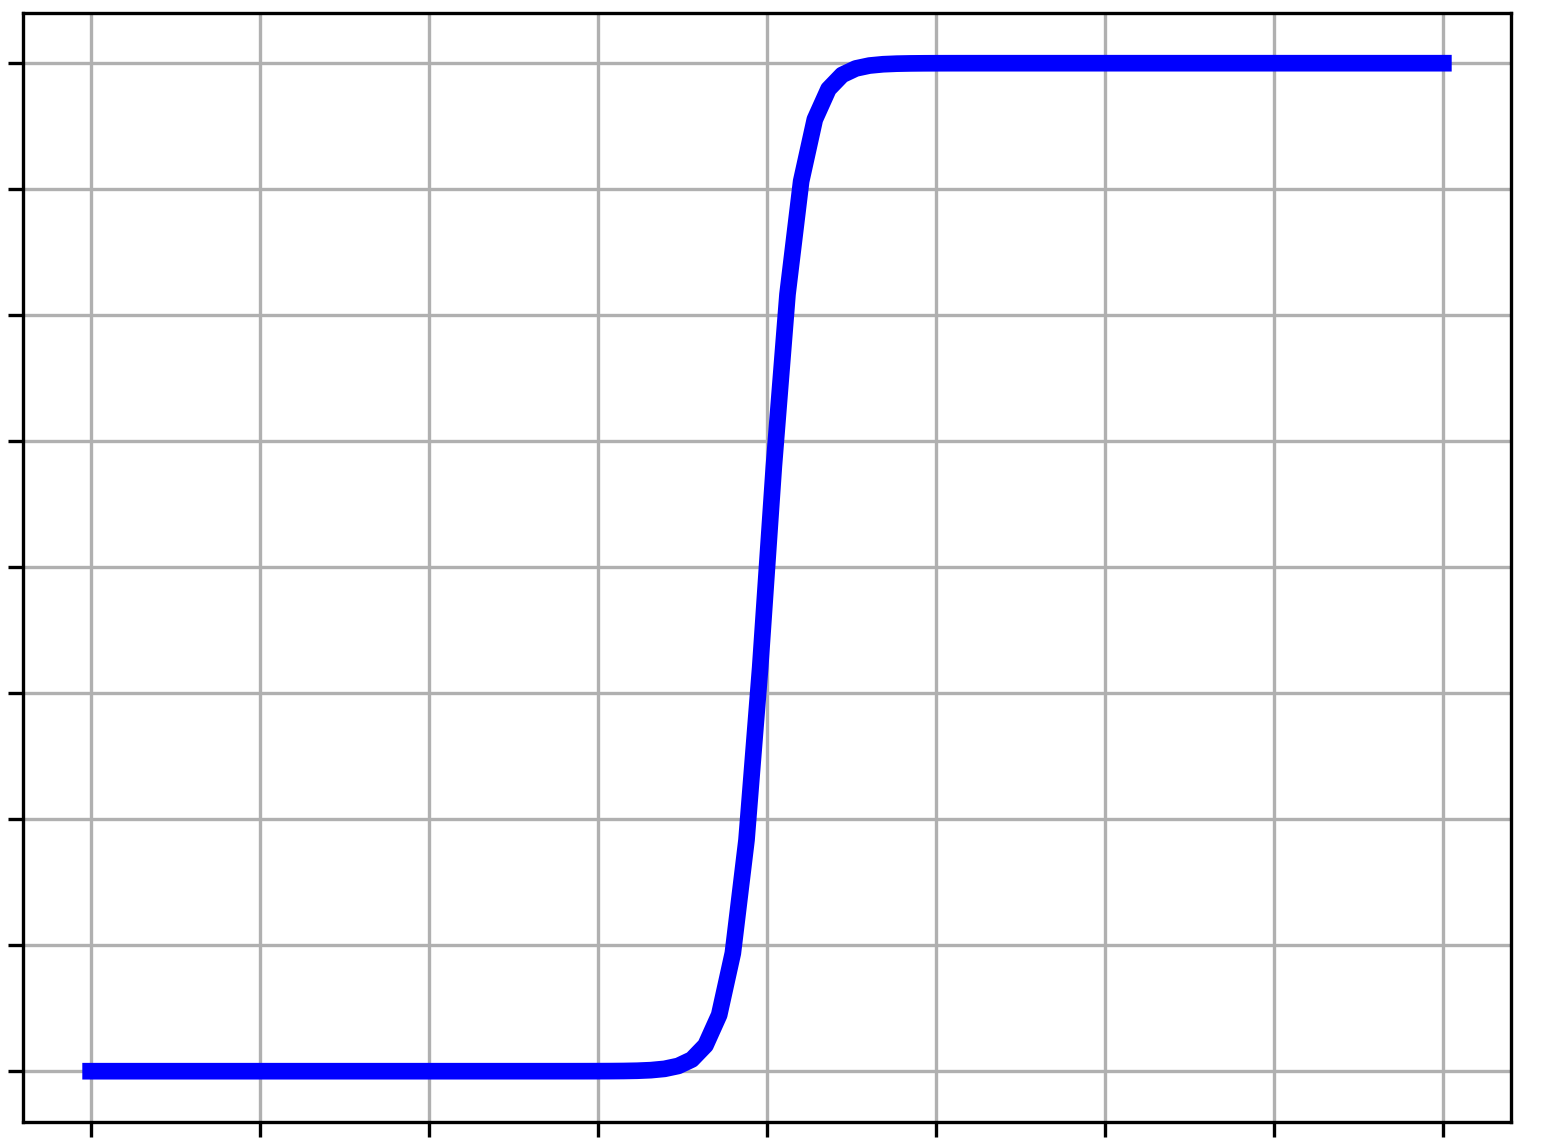 hyperbolic tangent activation function chart